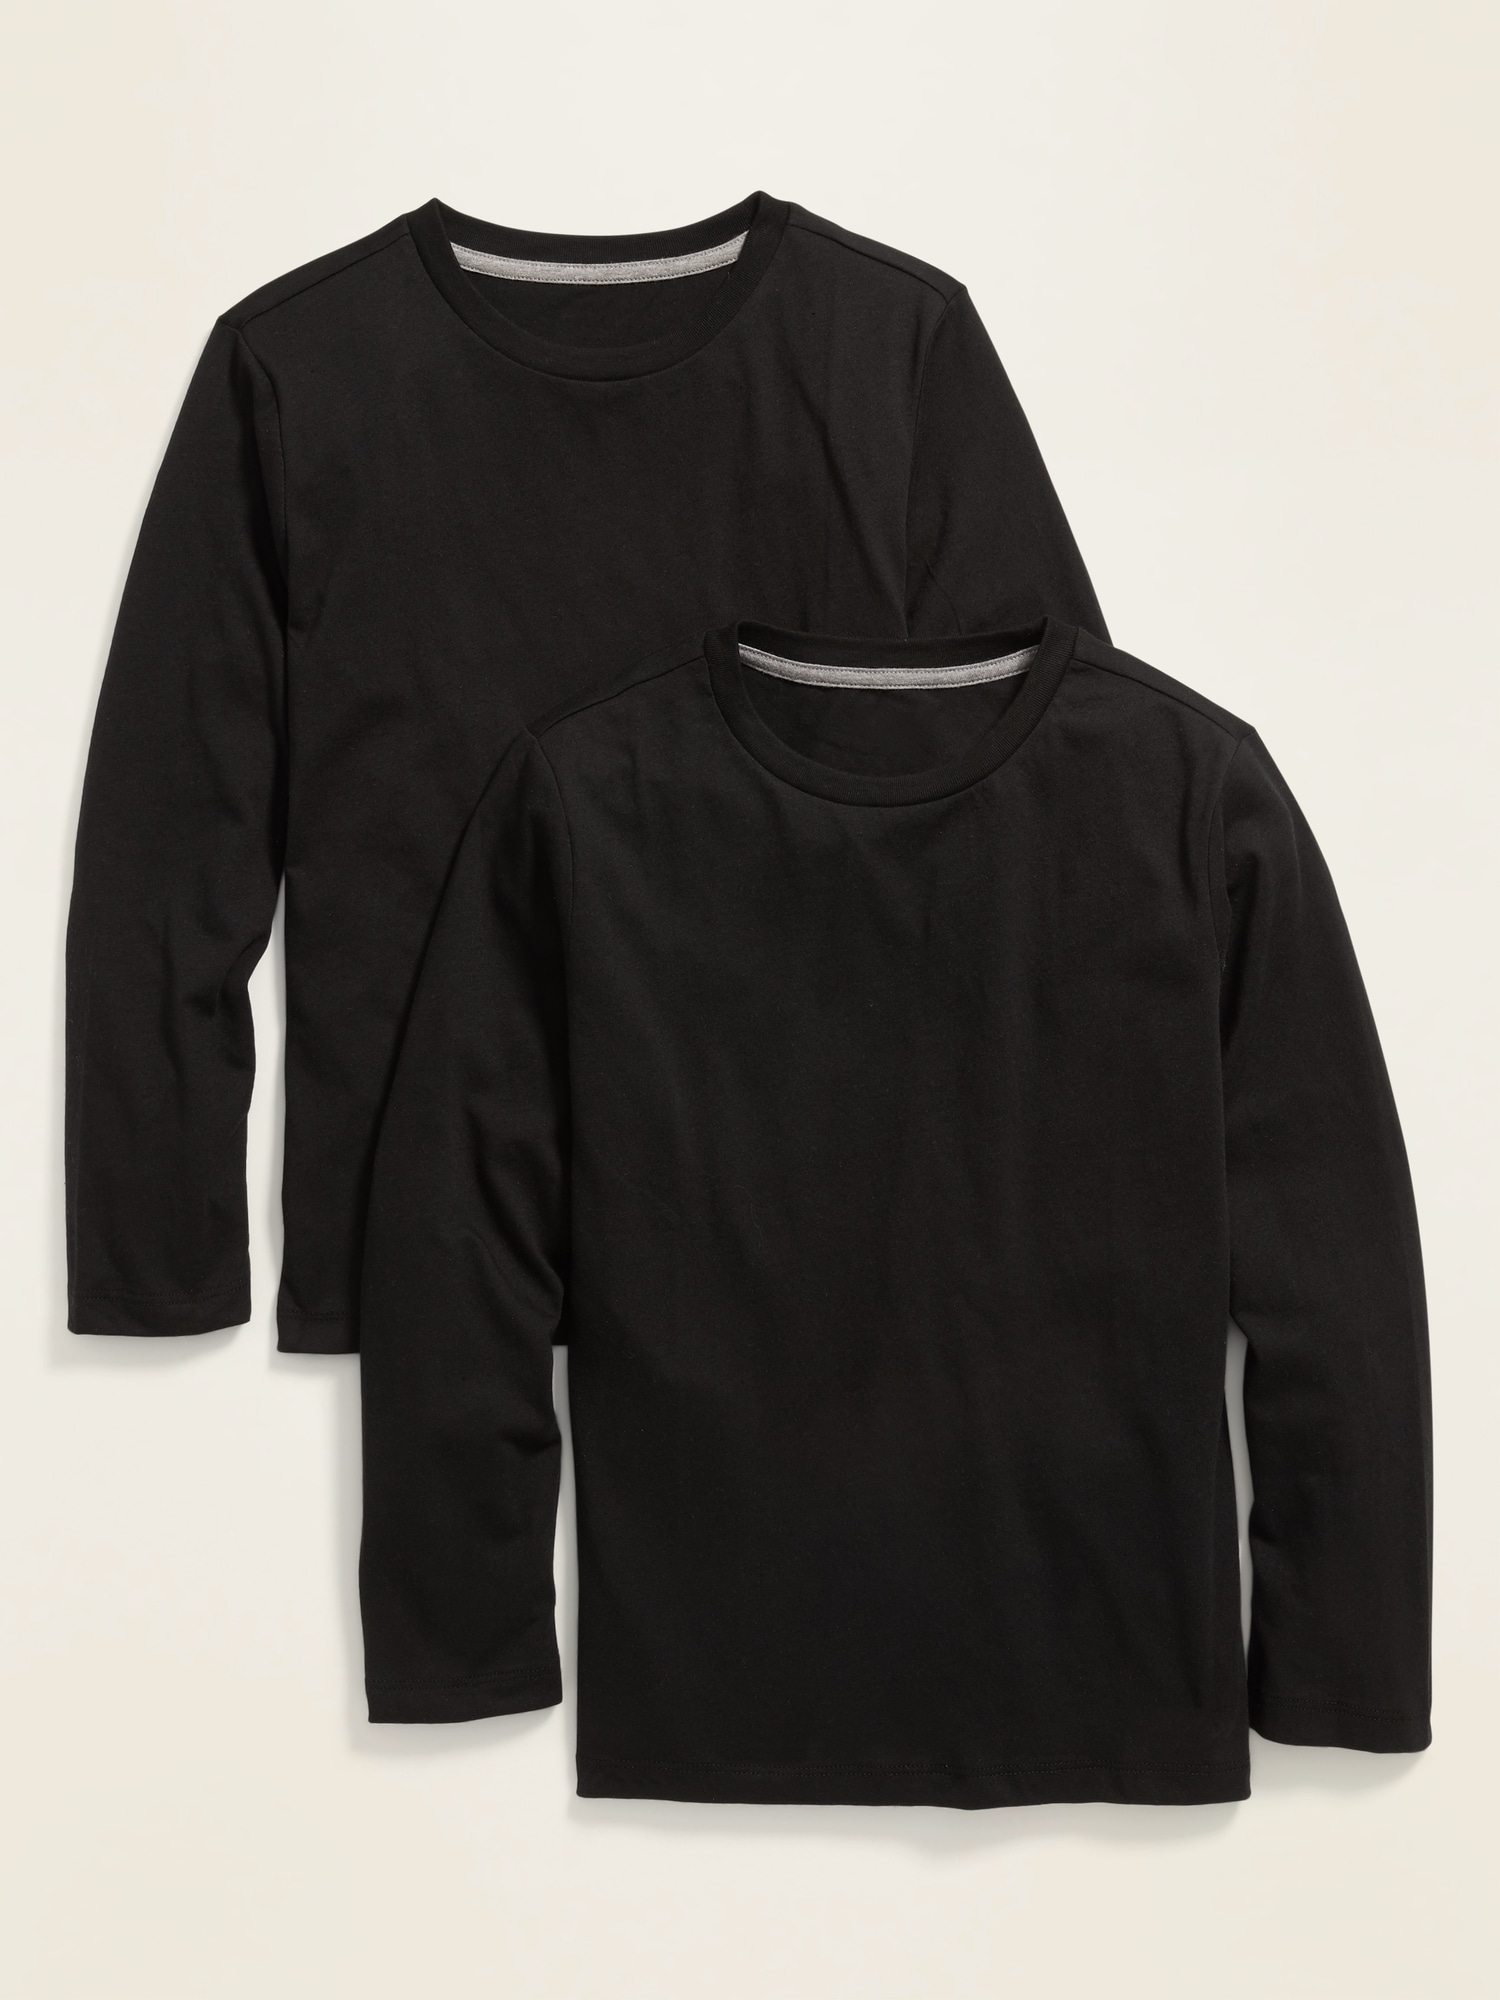 Softest Long-Sleeve T-Shirt 2-Pack For Boys | Old Navy